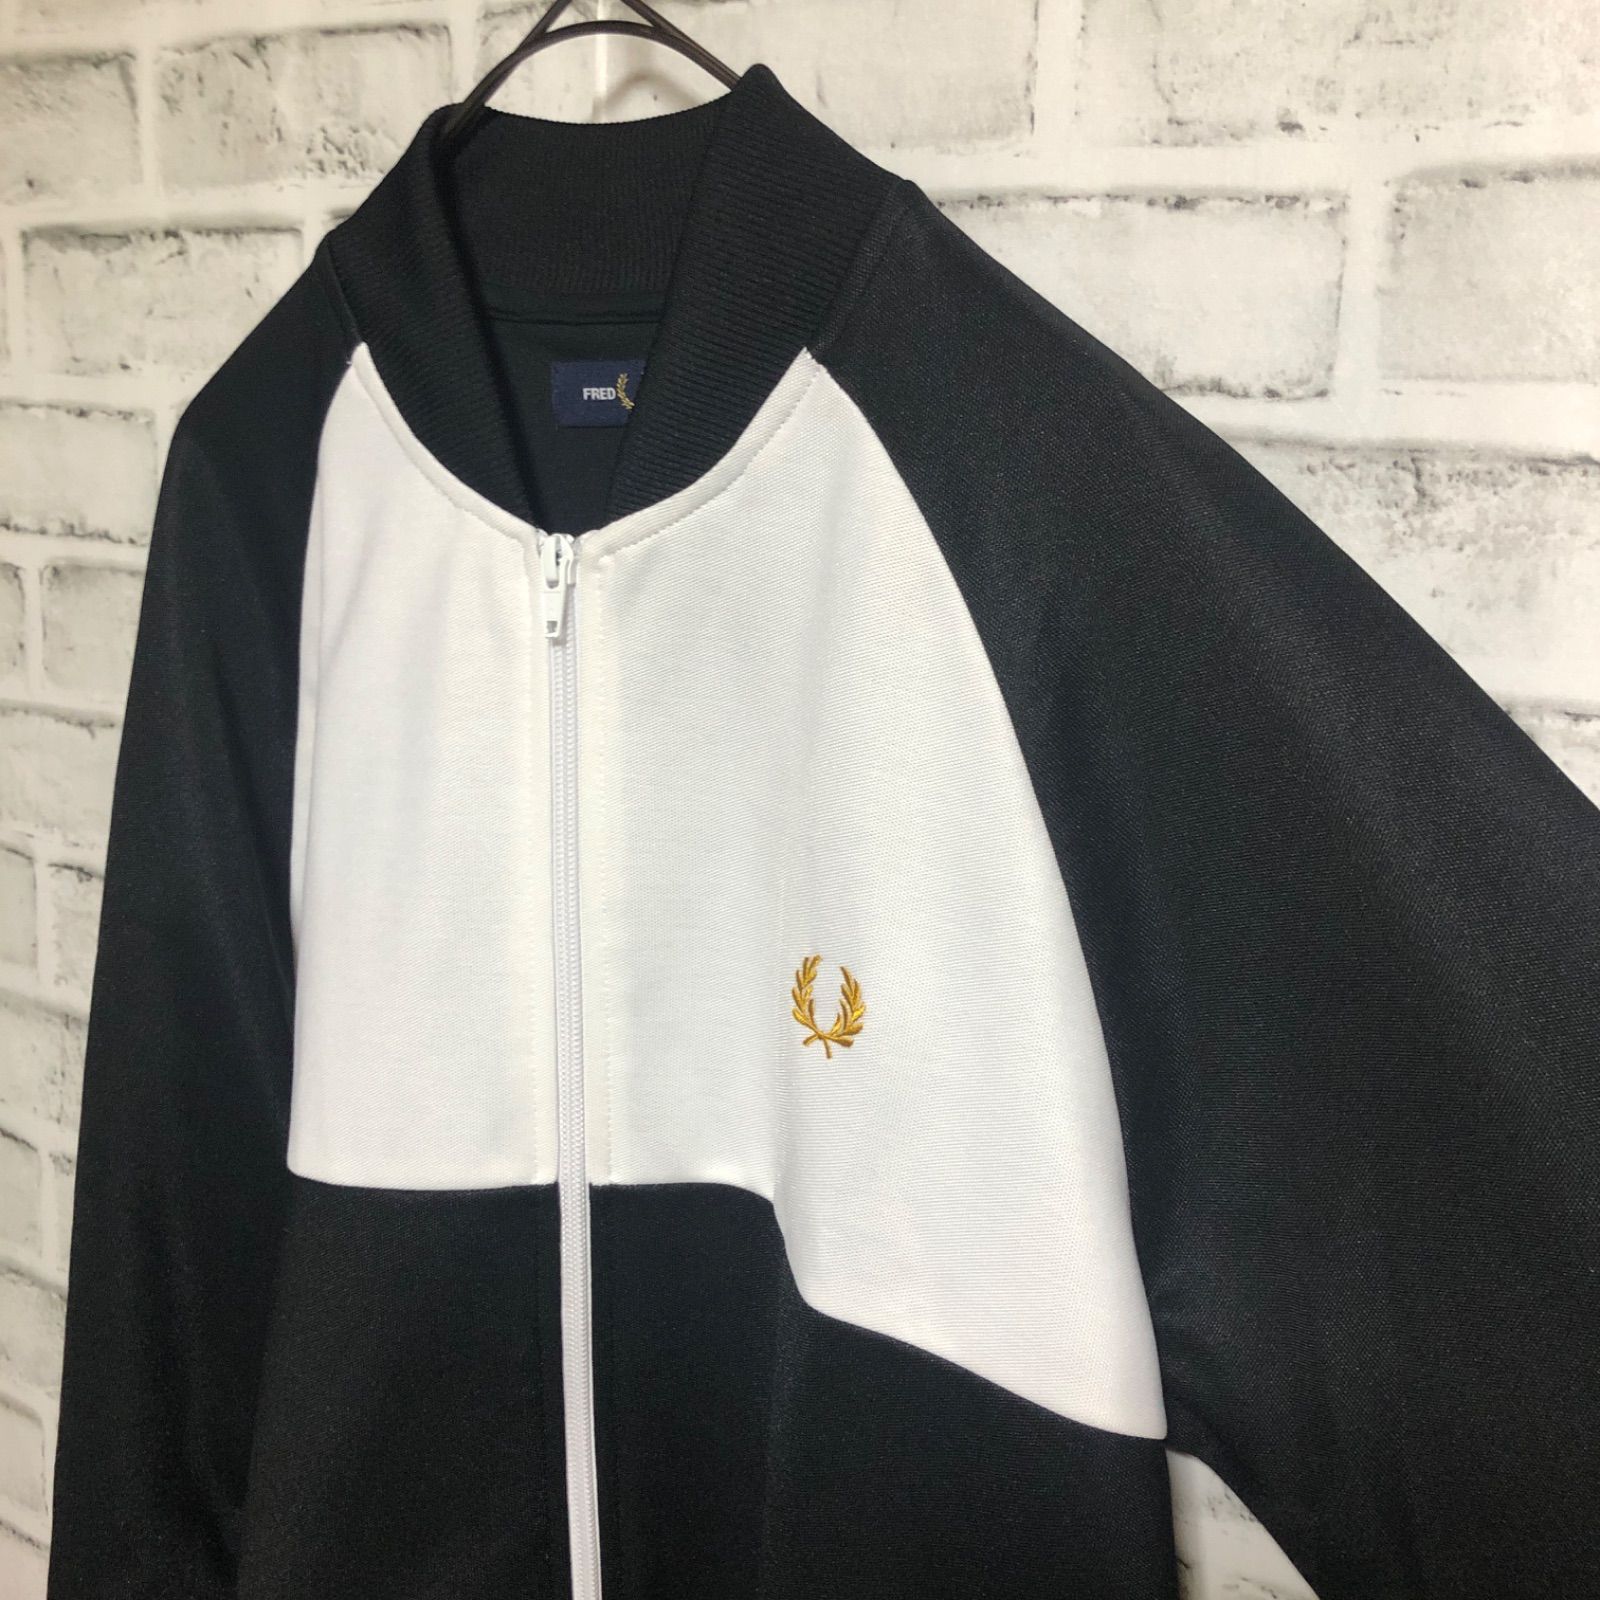 FRED PERRY 希少ジャージ　黒　美品　※デッドストックジャージ